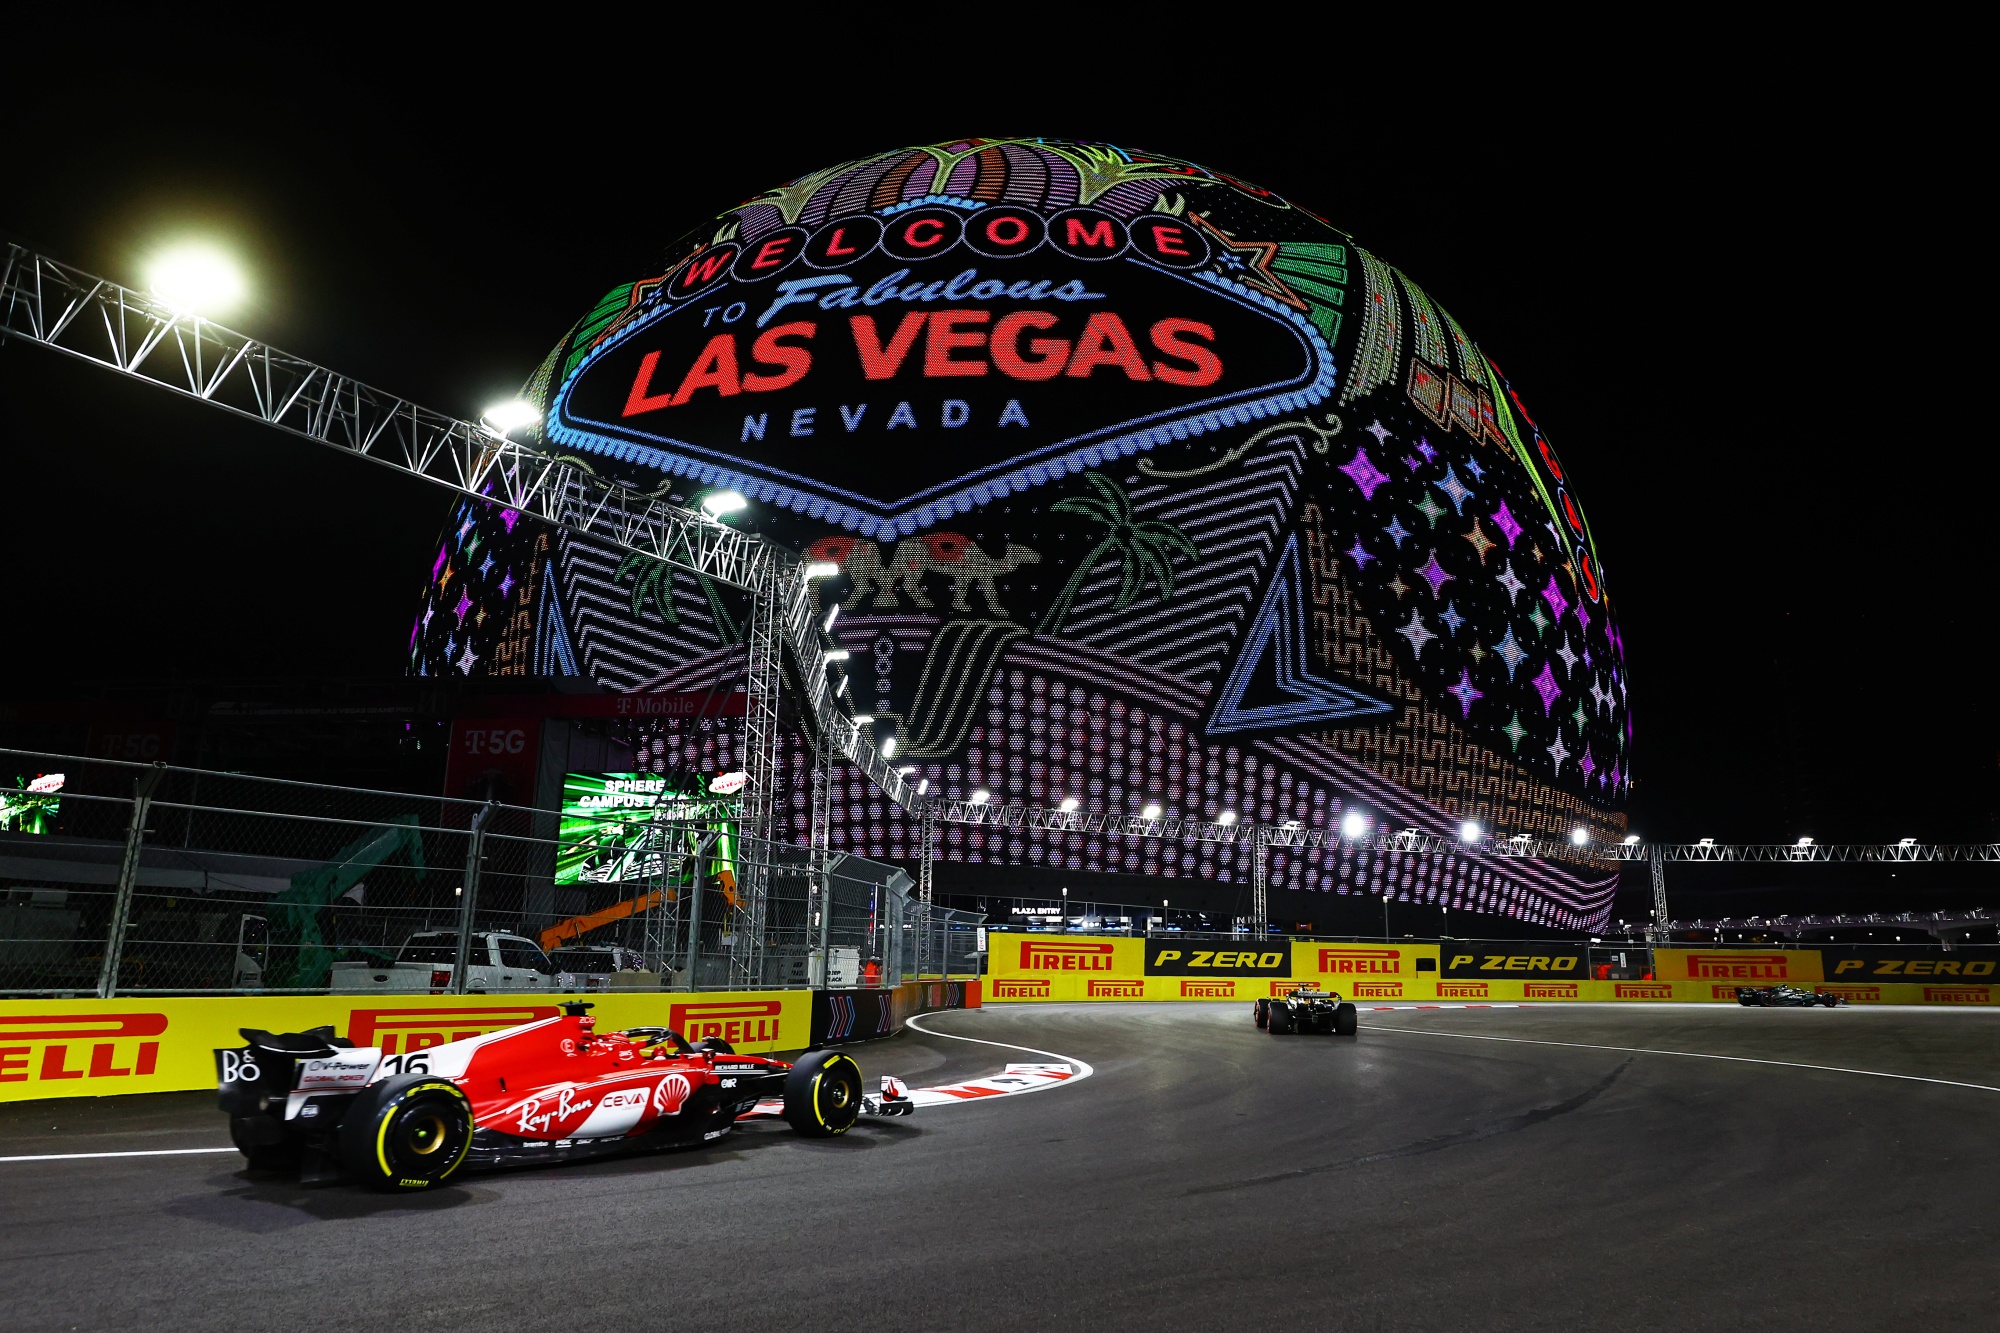 Las Vegas reaped the benefits of Formula 1, but not all participants emerged victorious.